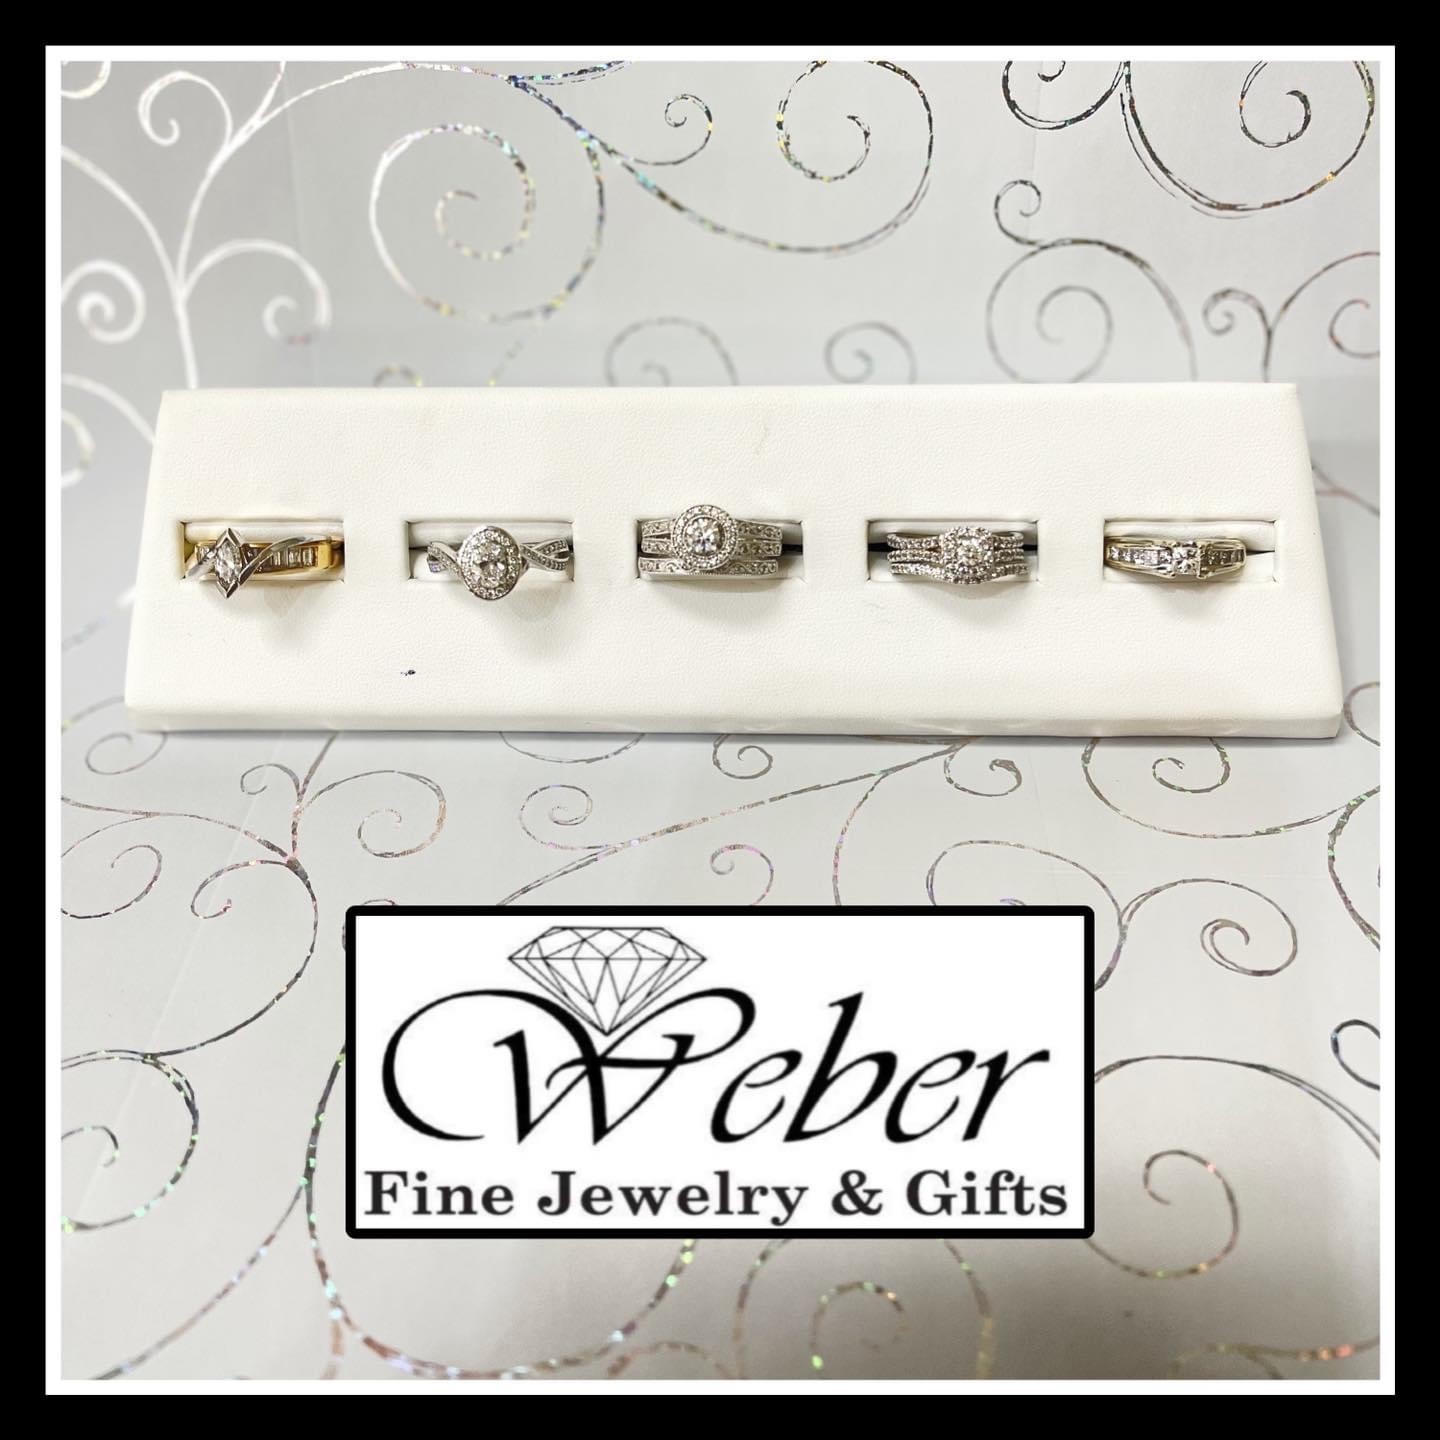 Weber Jewelry & Gifts